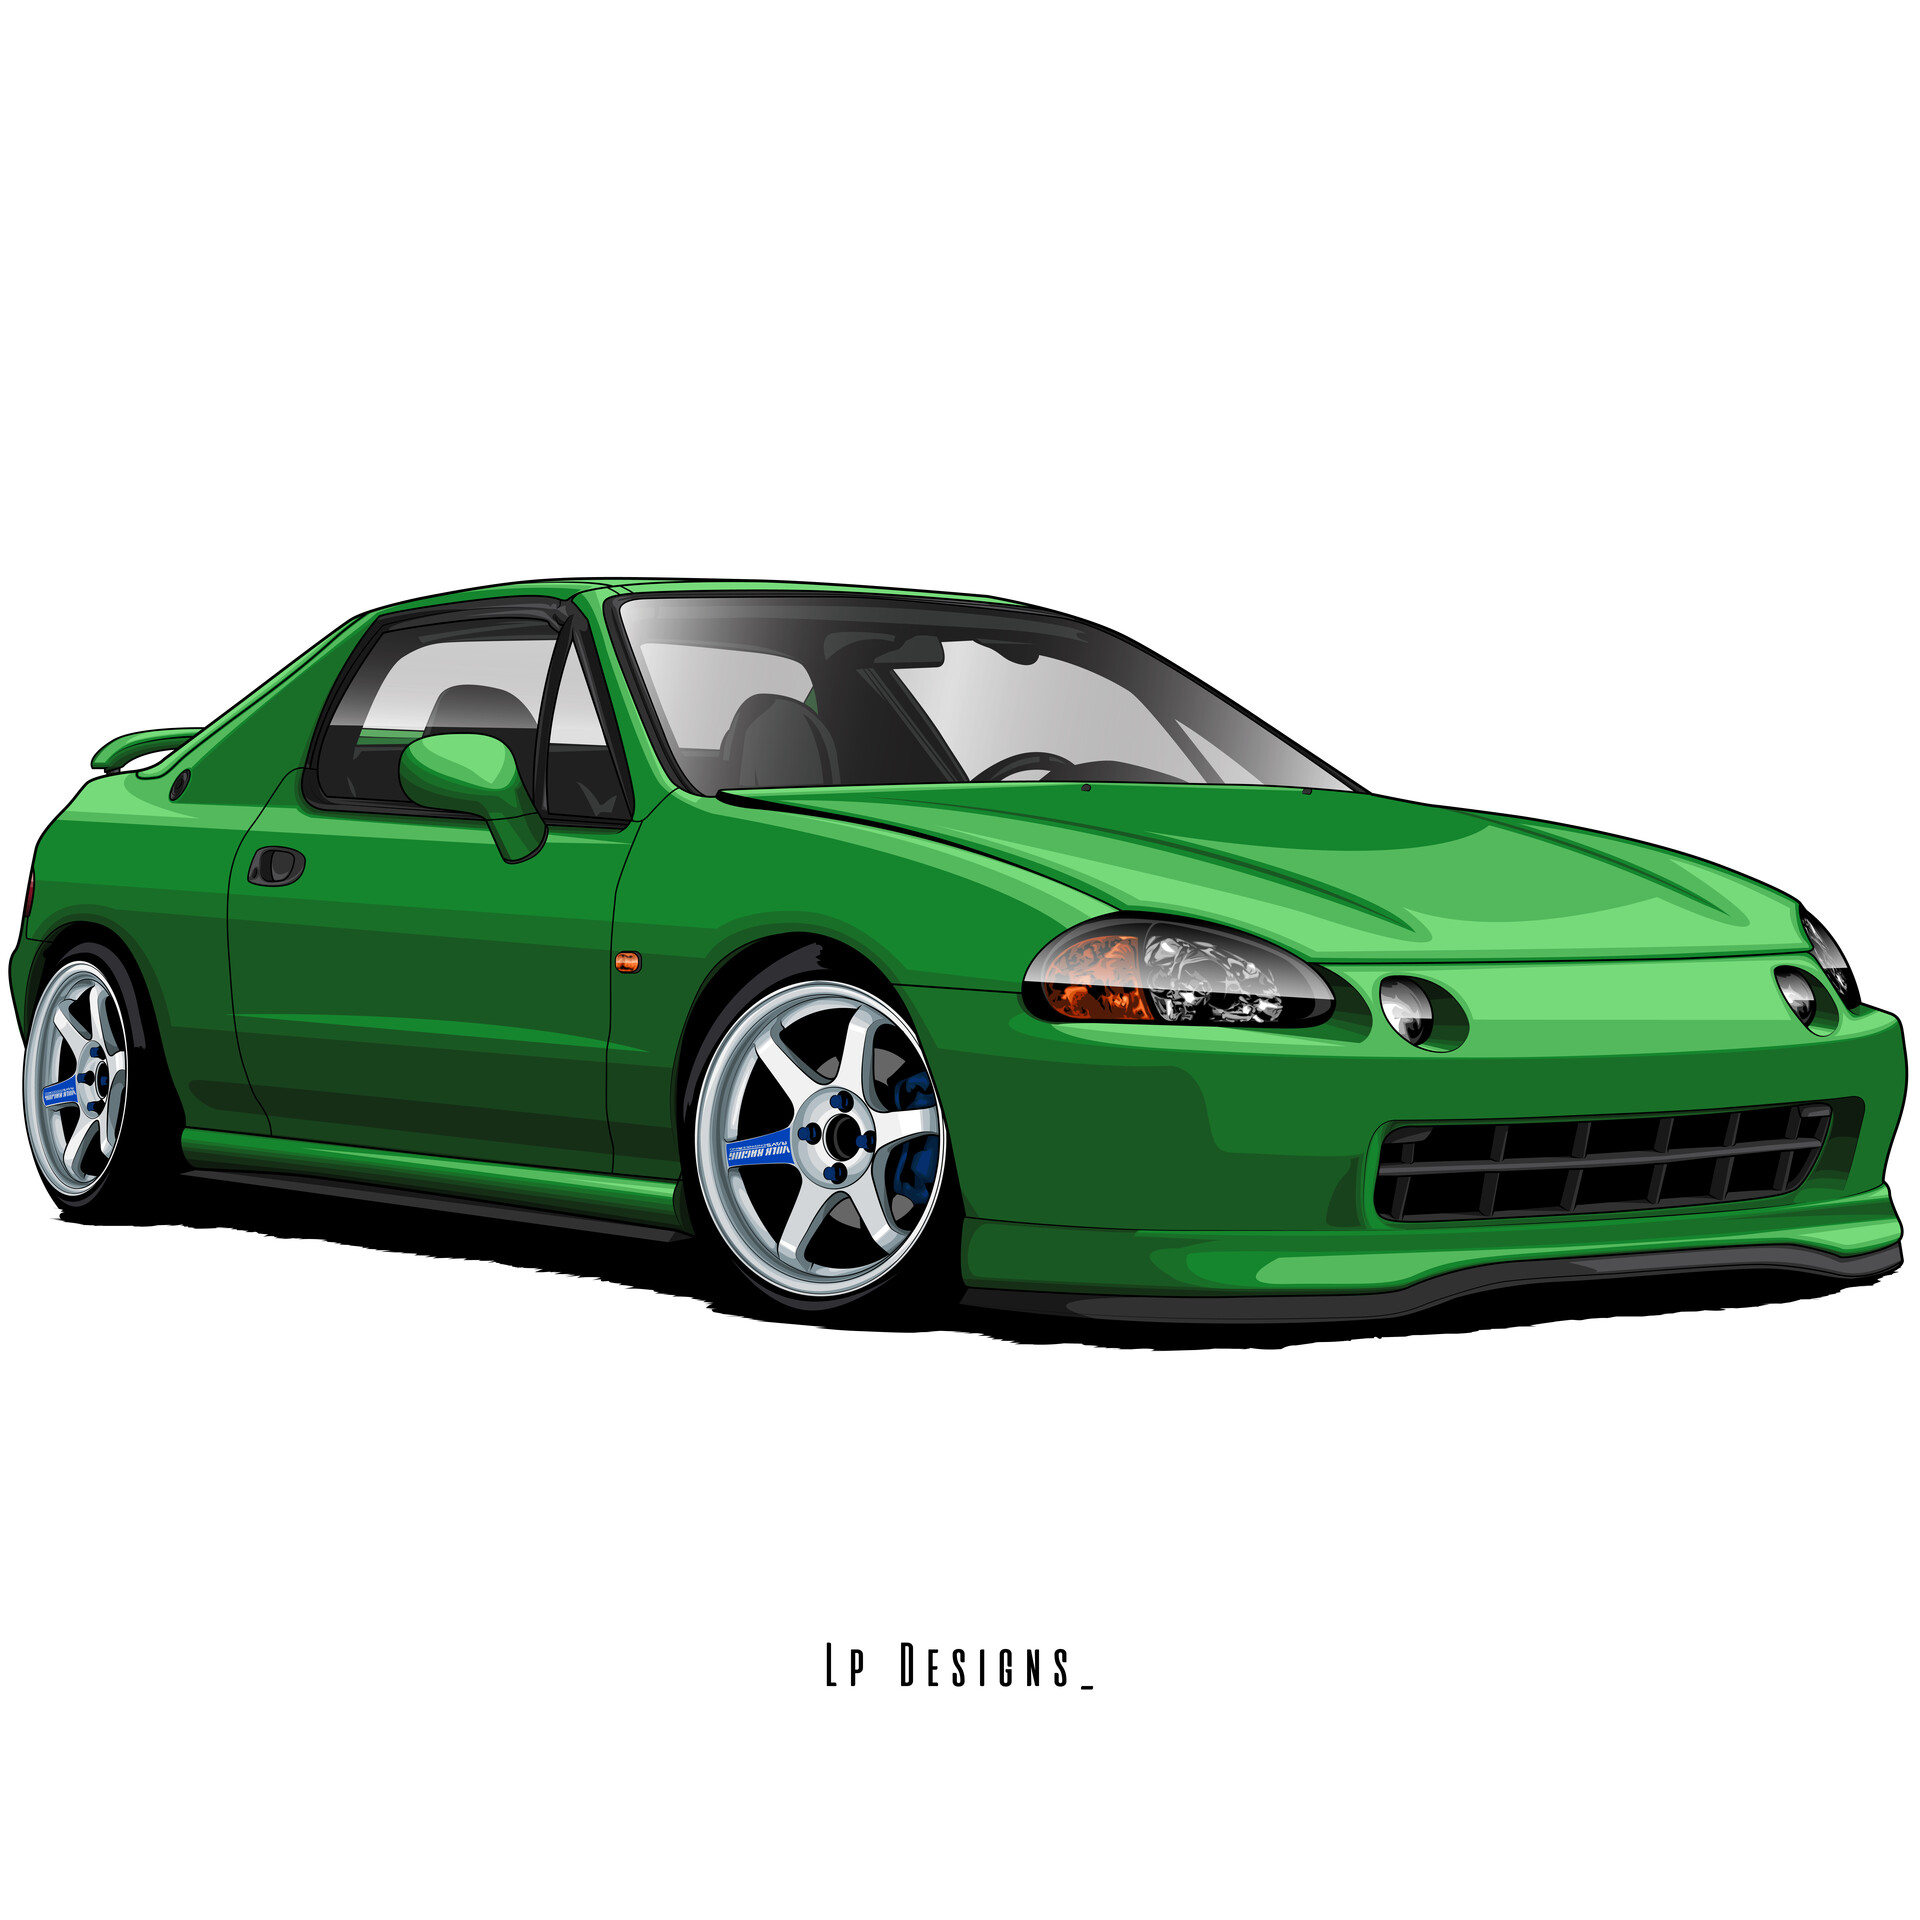 Why did they stop making the Honda del Sol?